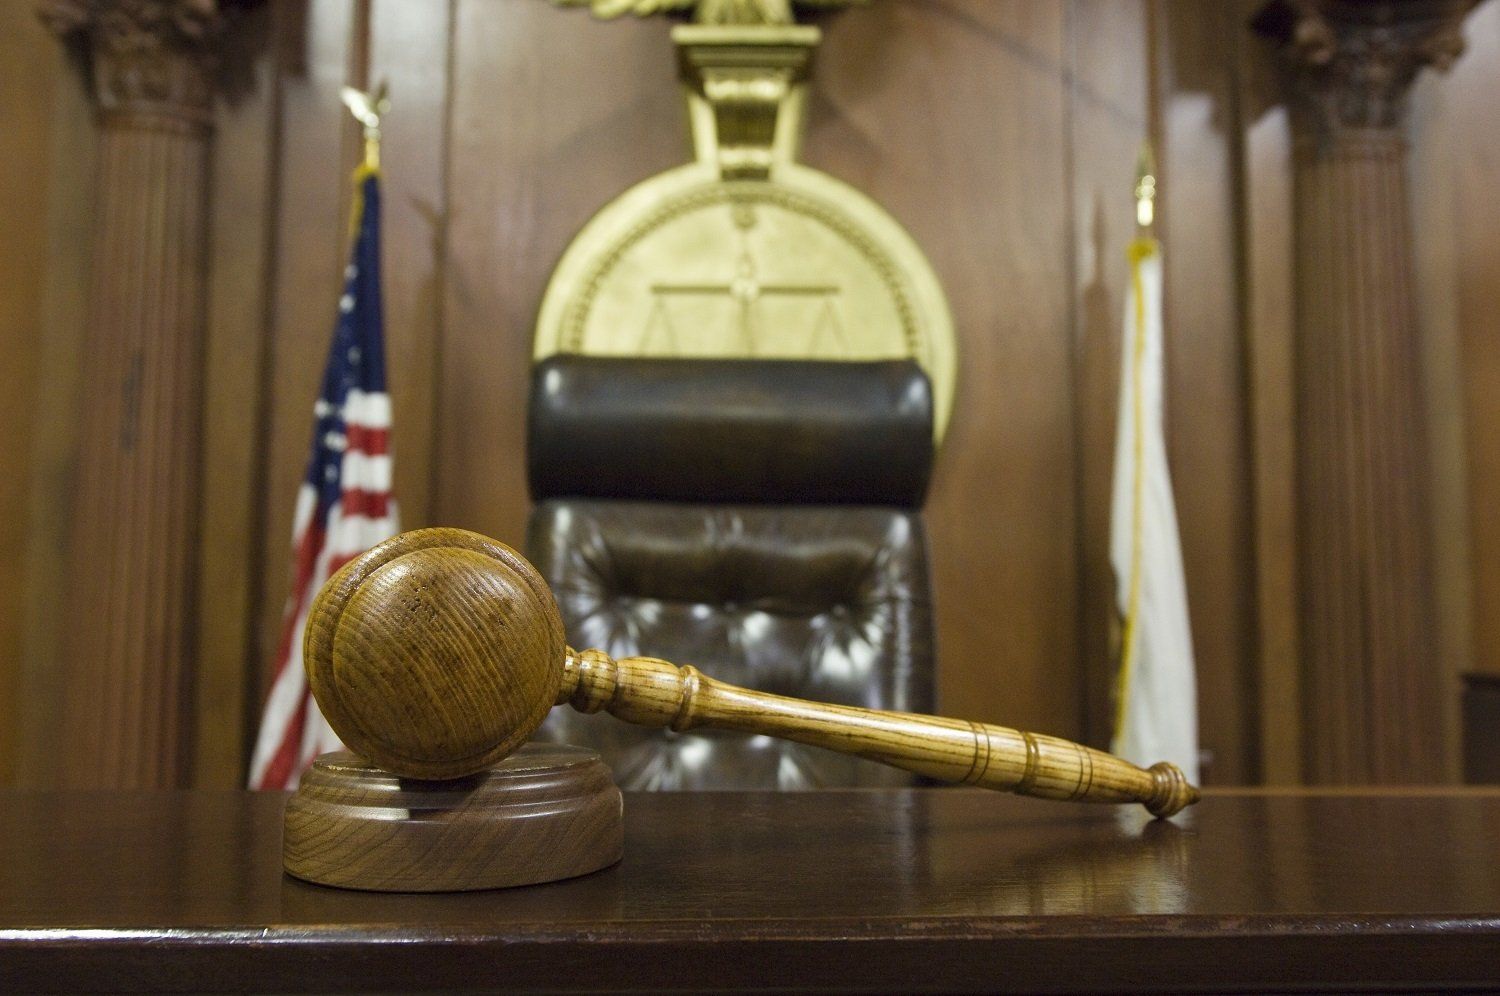 Judge's desk in the courtroom with a gavel in front.